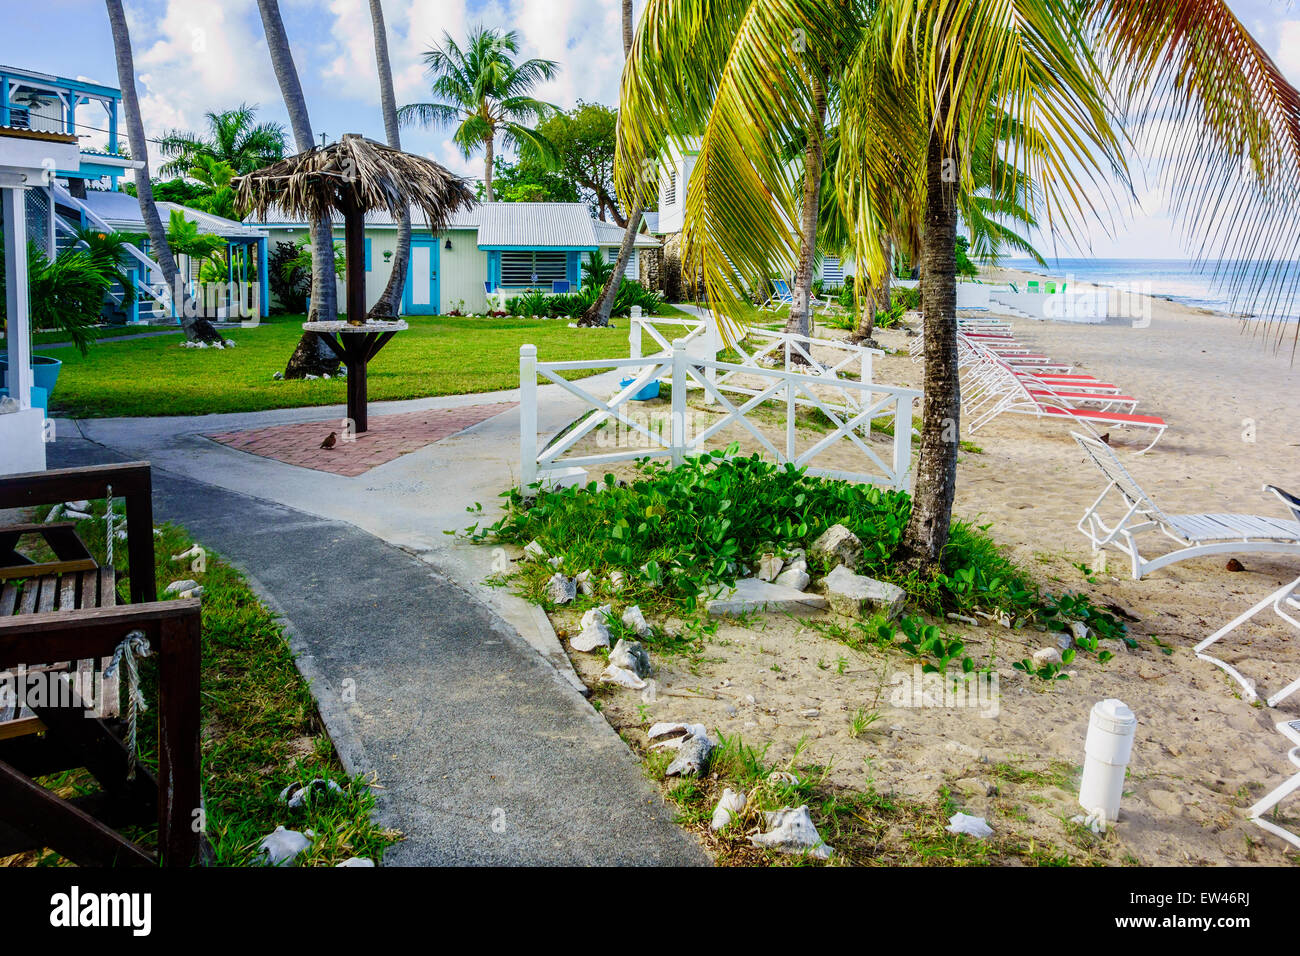 Cottages By the Sea, a resort on the west end of St. Croix, U. S. Virgin Islands. Showing cottages, a path and the beach. Stock Photo